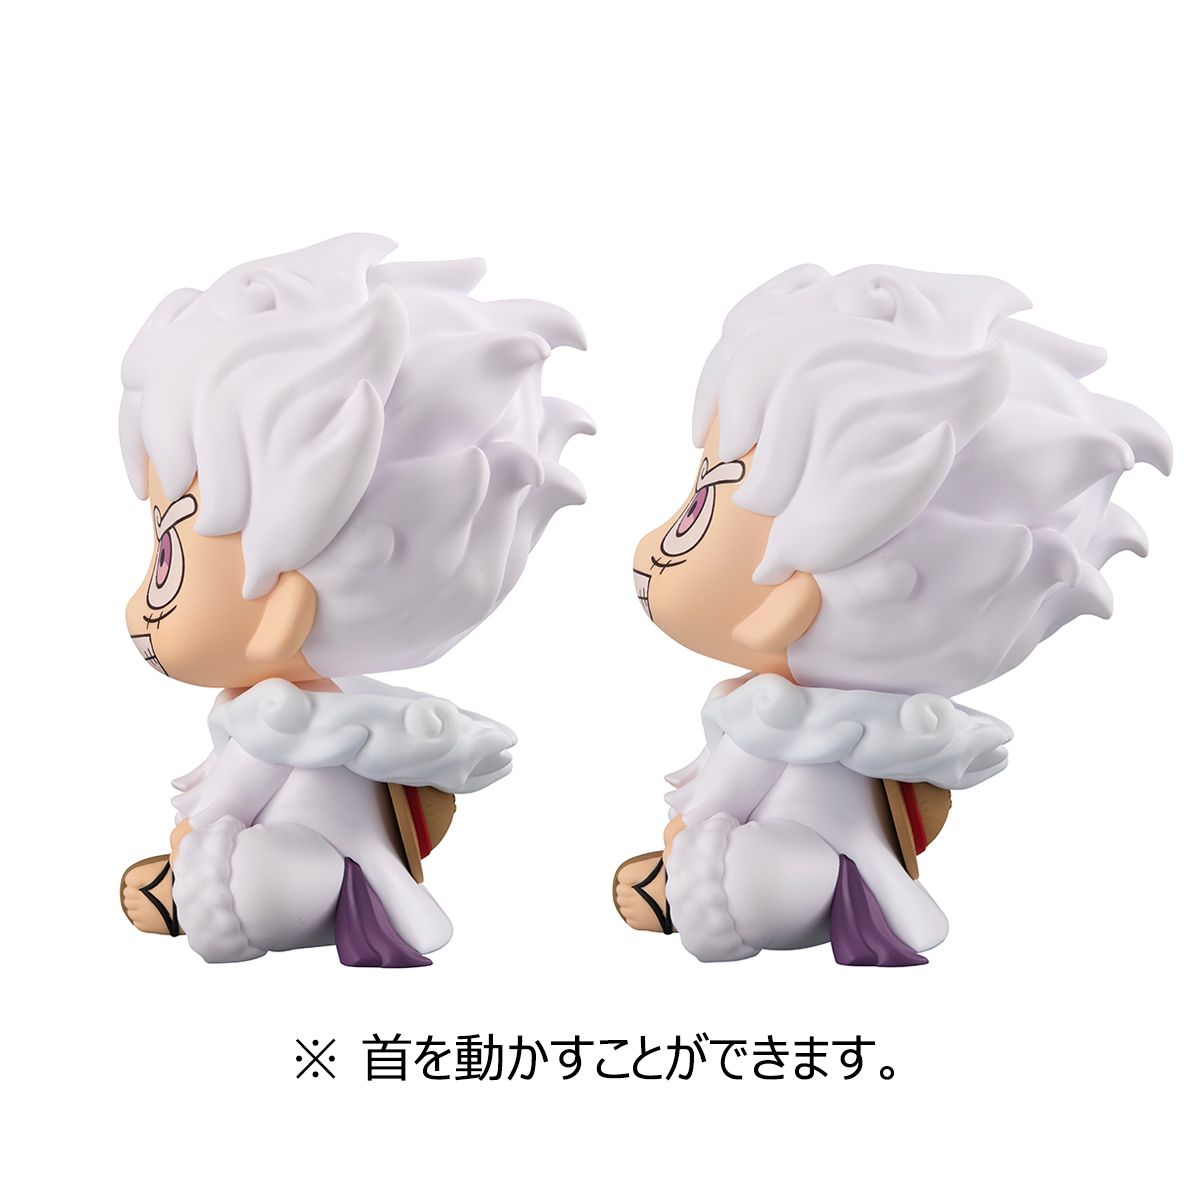 One Piece - Monkey D. Luffy Gear Five ＆Yamato Lookup Series Figure Set (With Gift) image count 7